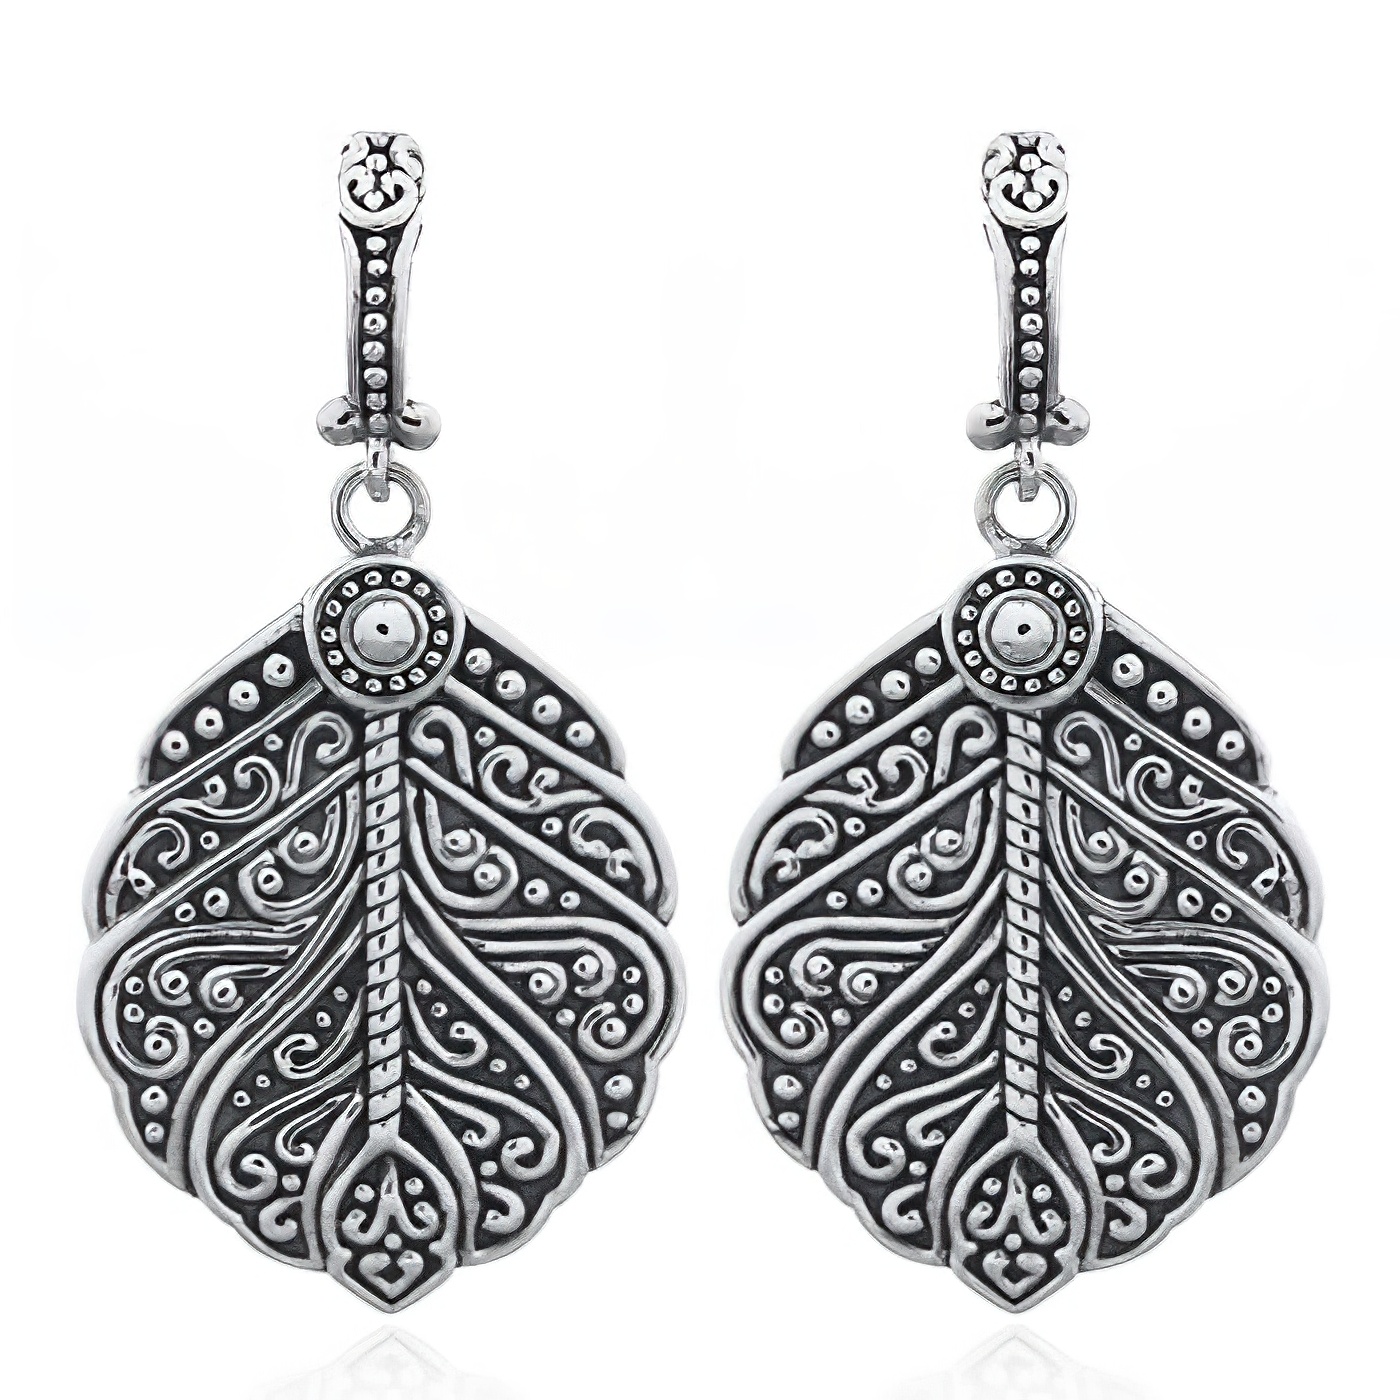 Exquisite Ornate Textured Leaf 925 Silver Stud Earrings by BeYindi 